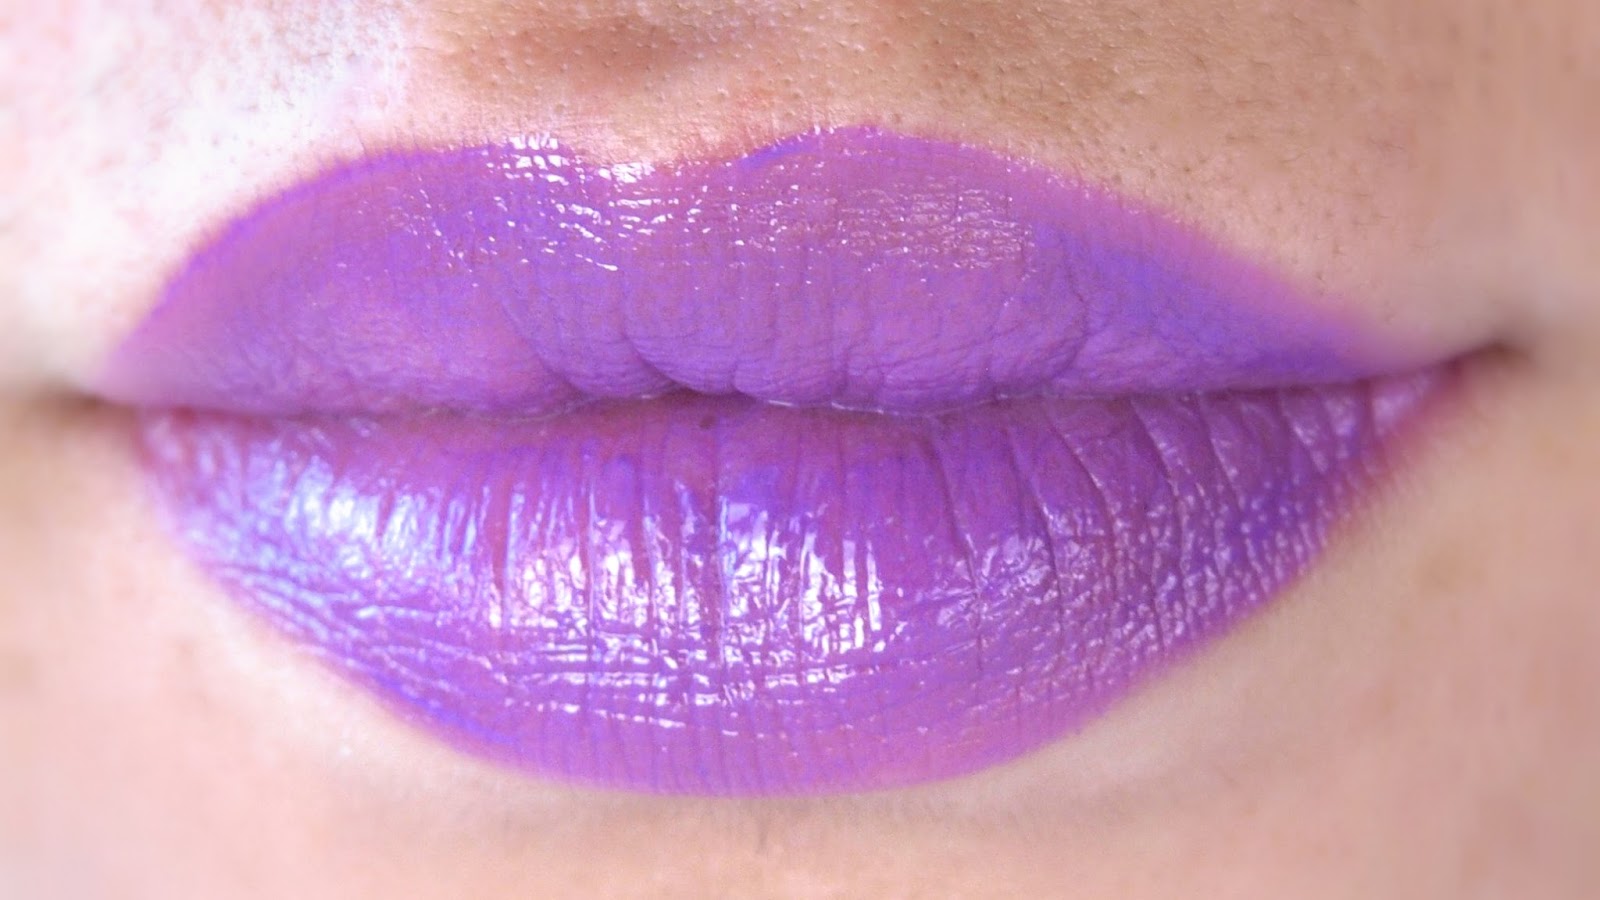 L.A. Girl Glazed Lip Paint in "Bombshell", "Pin-Up" & "Coy": Review and Swatches